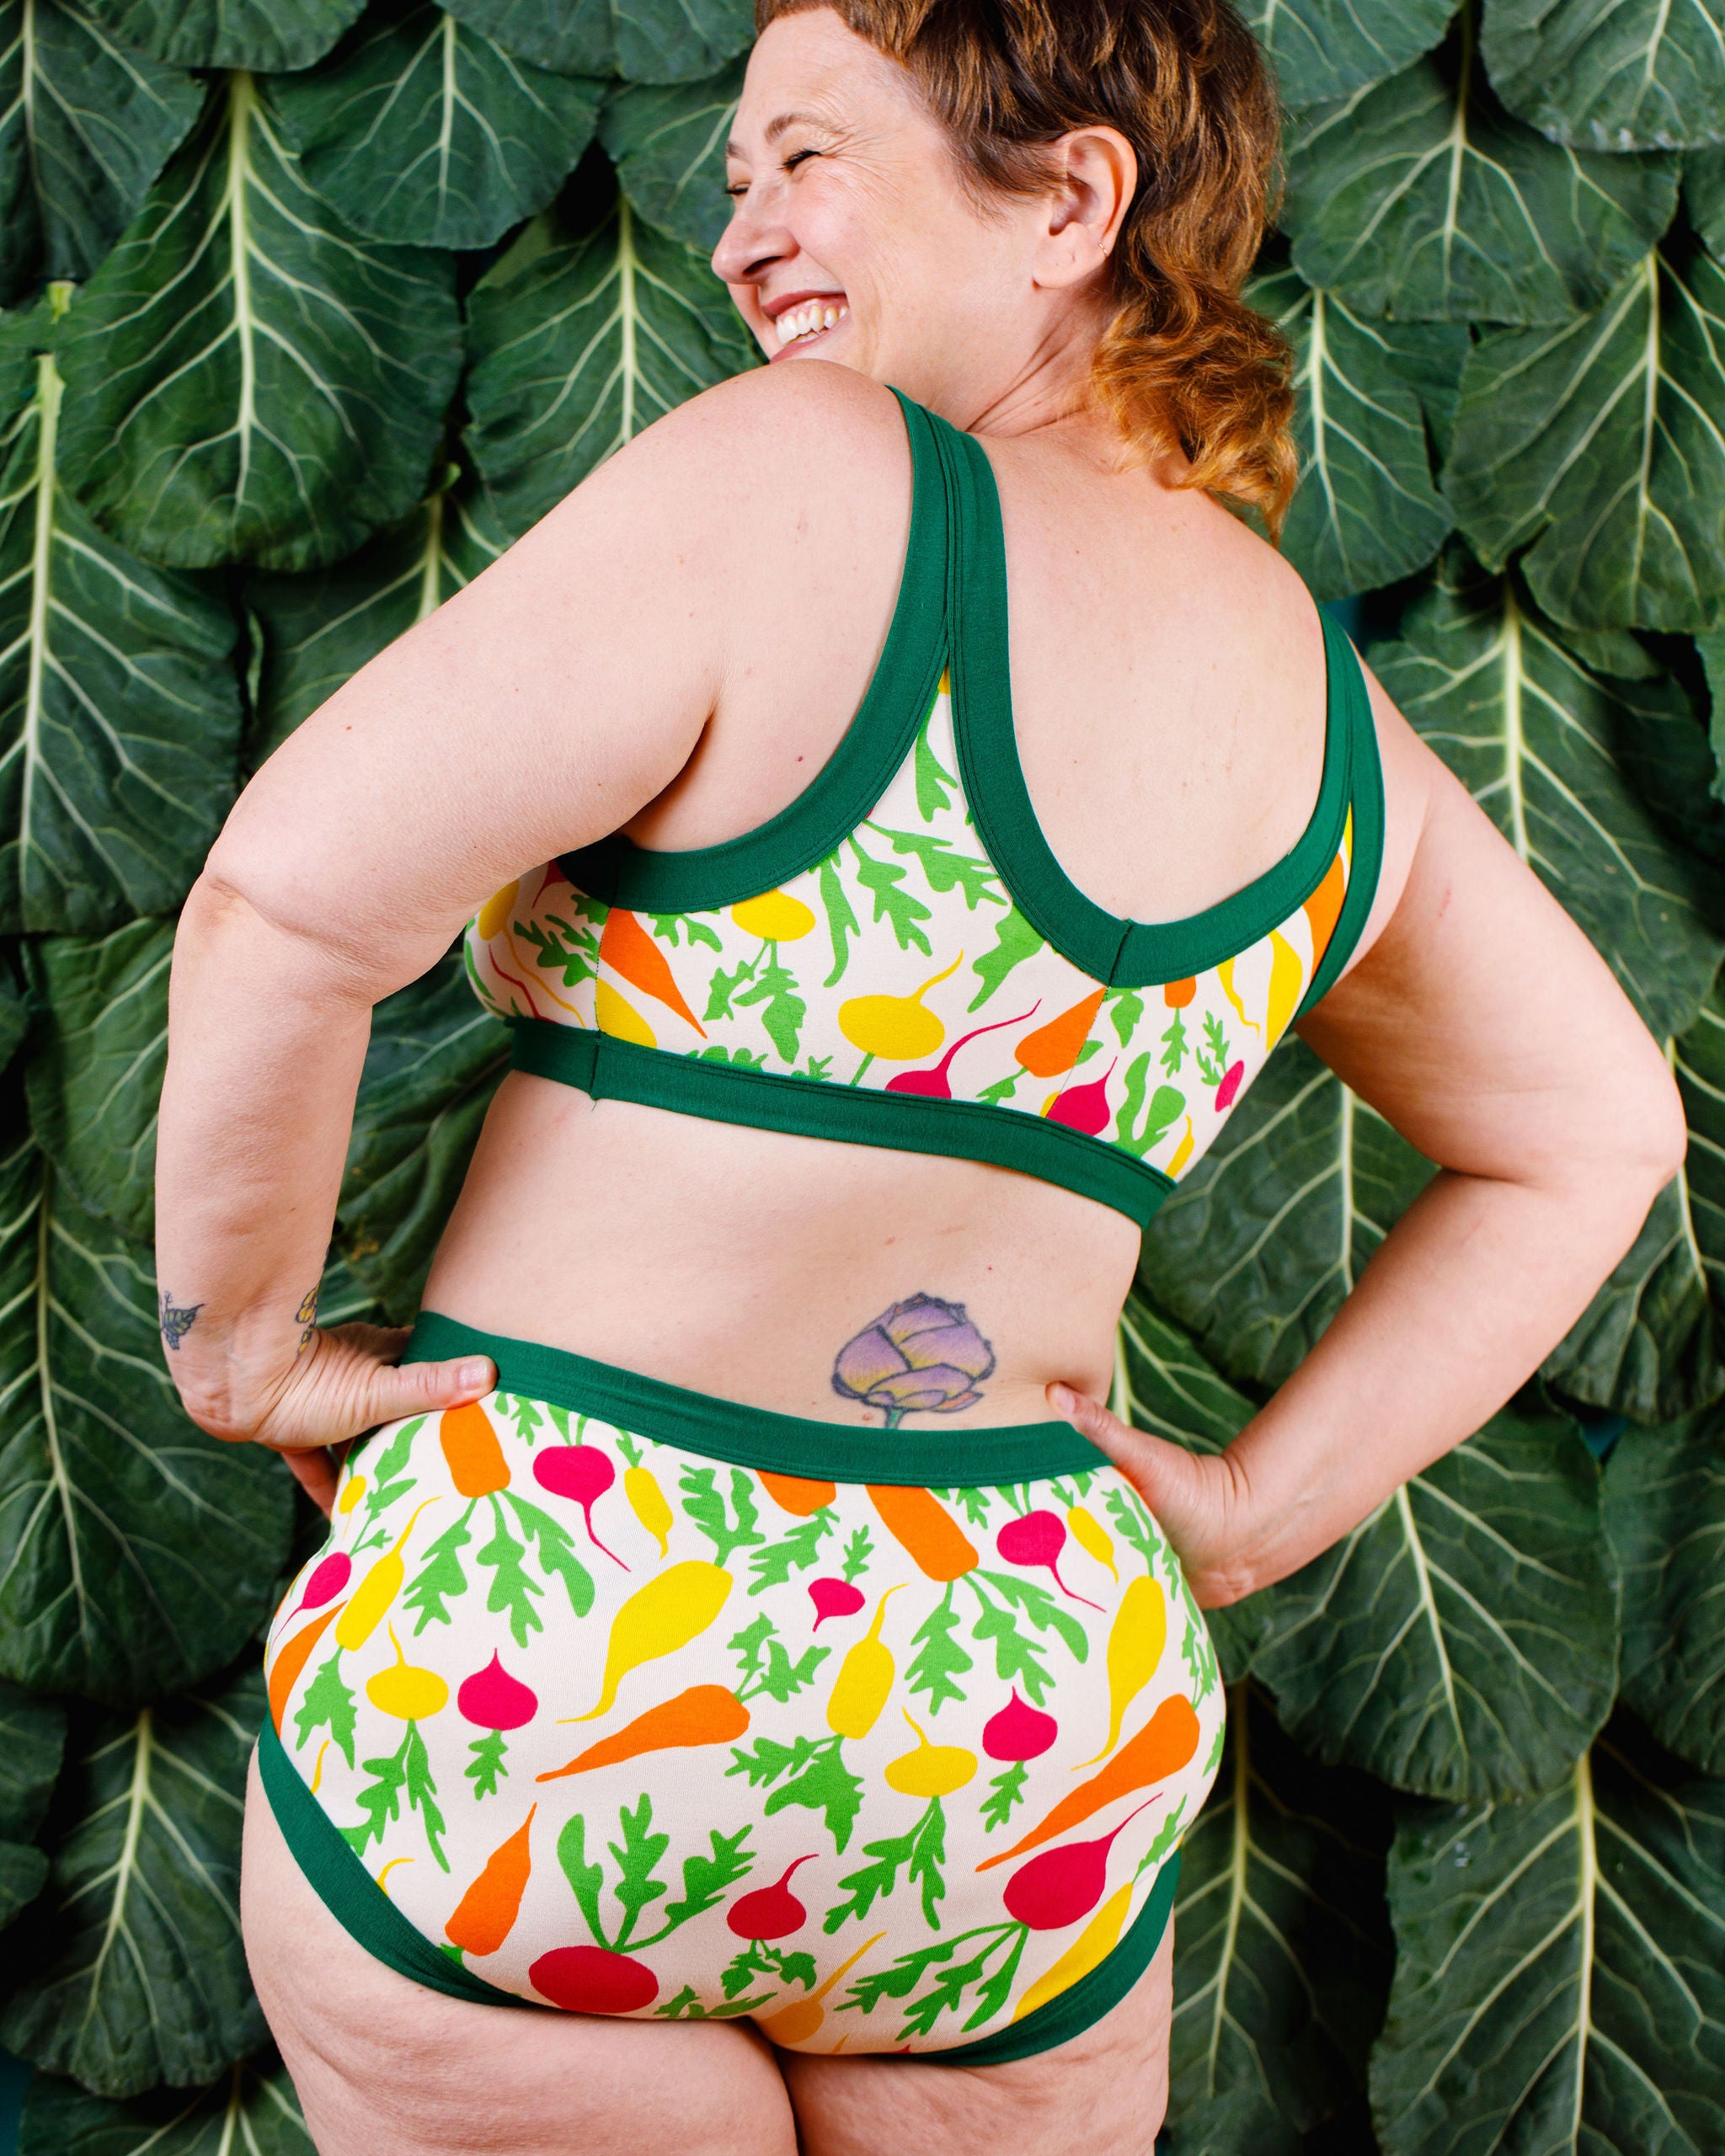 Back of model wearing Thunderants Original style underwear and matching Bralette in Root Veggies print - yellow, orange, pink, and green vegetables.